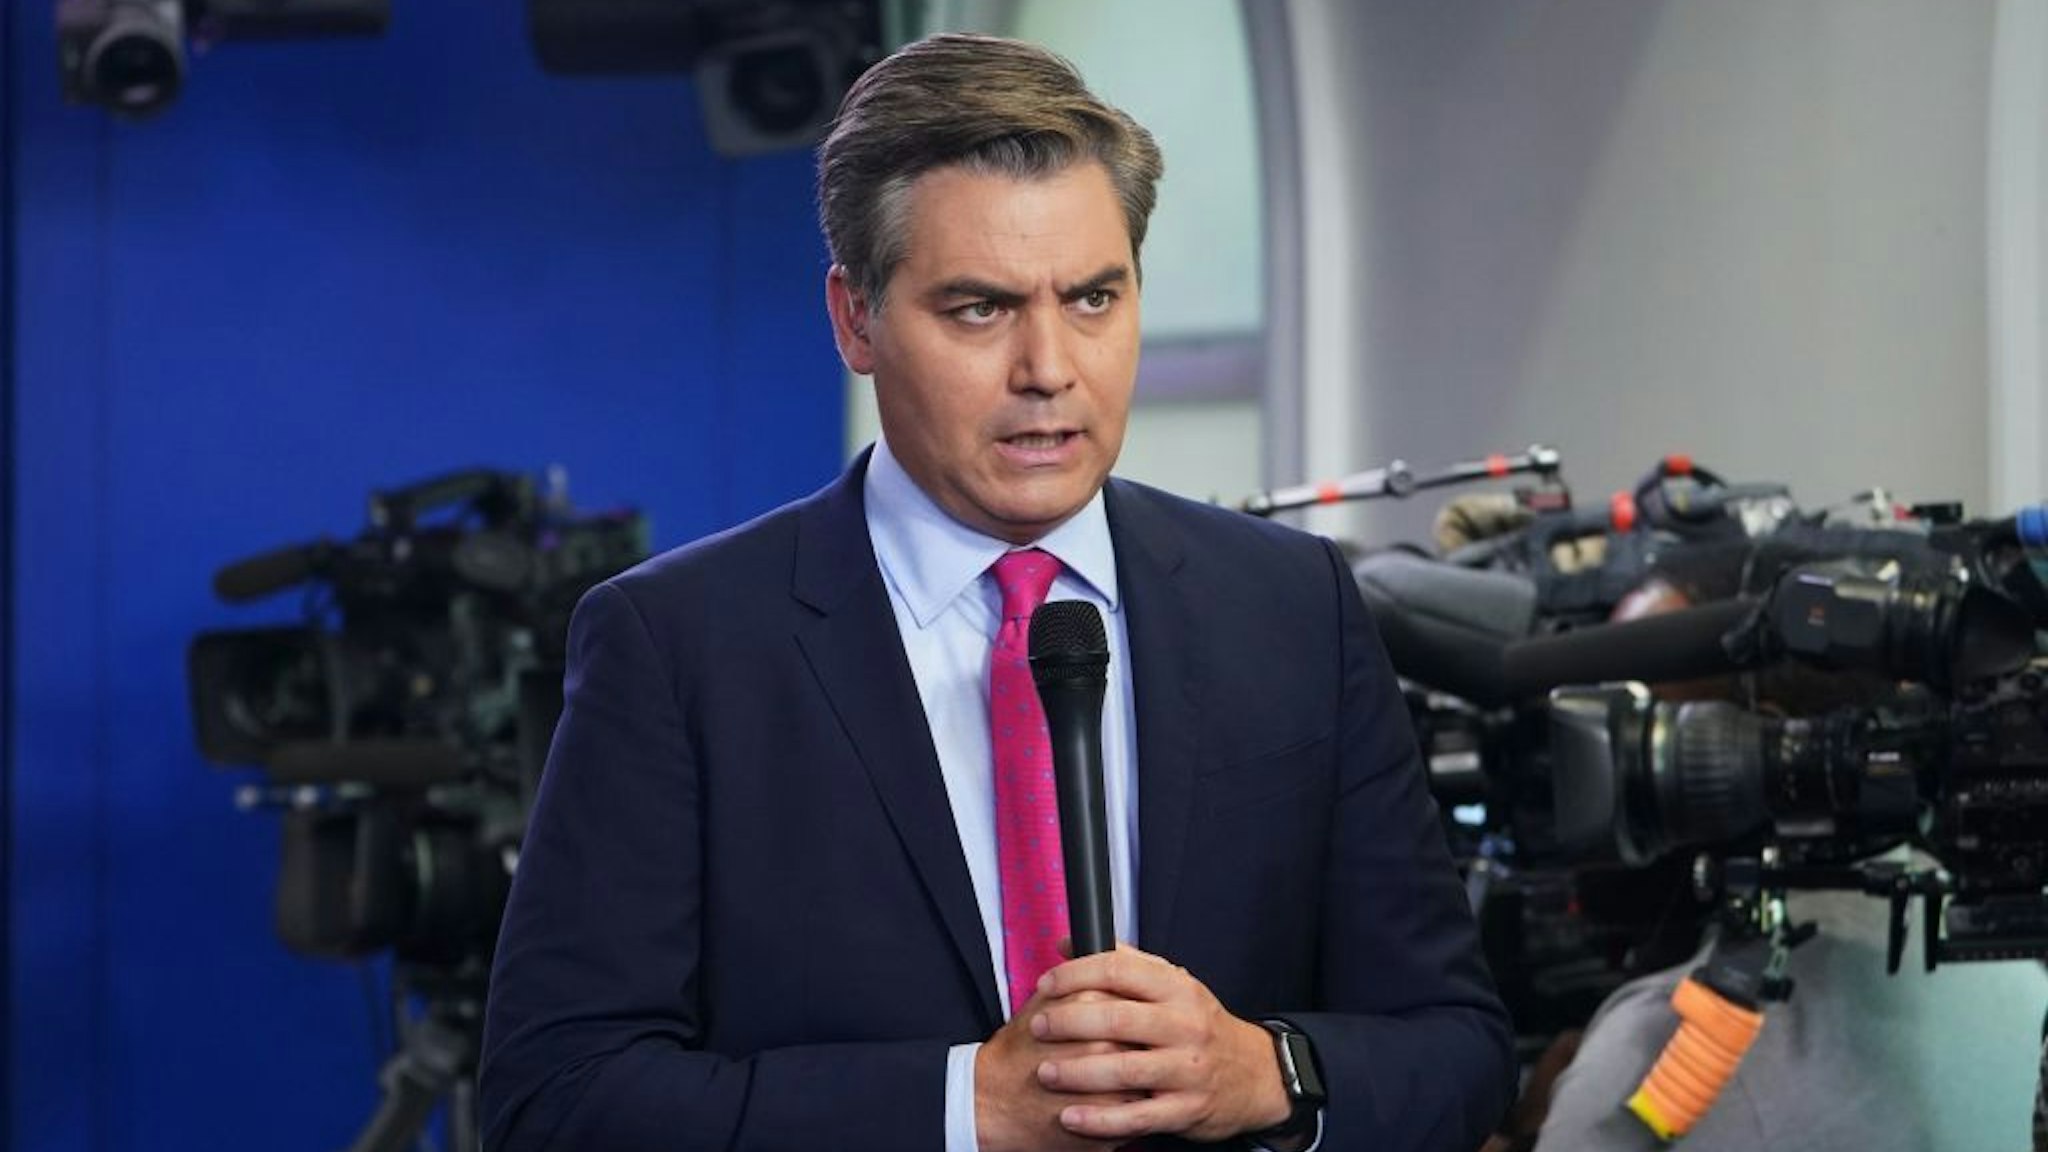 CNN chief White House correspondent Jim Acosta is seen before a briefing by White House Press Secretary Sarah Sanders in the Brady Briefing Room of the White House in Washington, DC on October 3, 2018. (Photo by MANDEL NGAN / AFP) (Photo credit should read MANDEL NGAN/AFP via Getty Images)